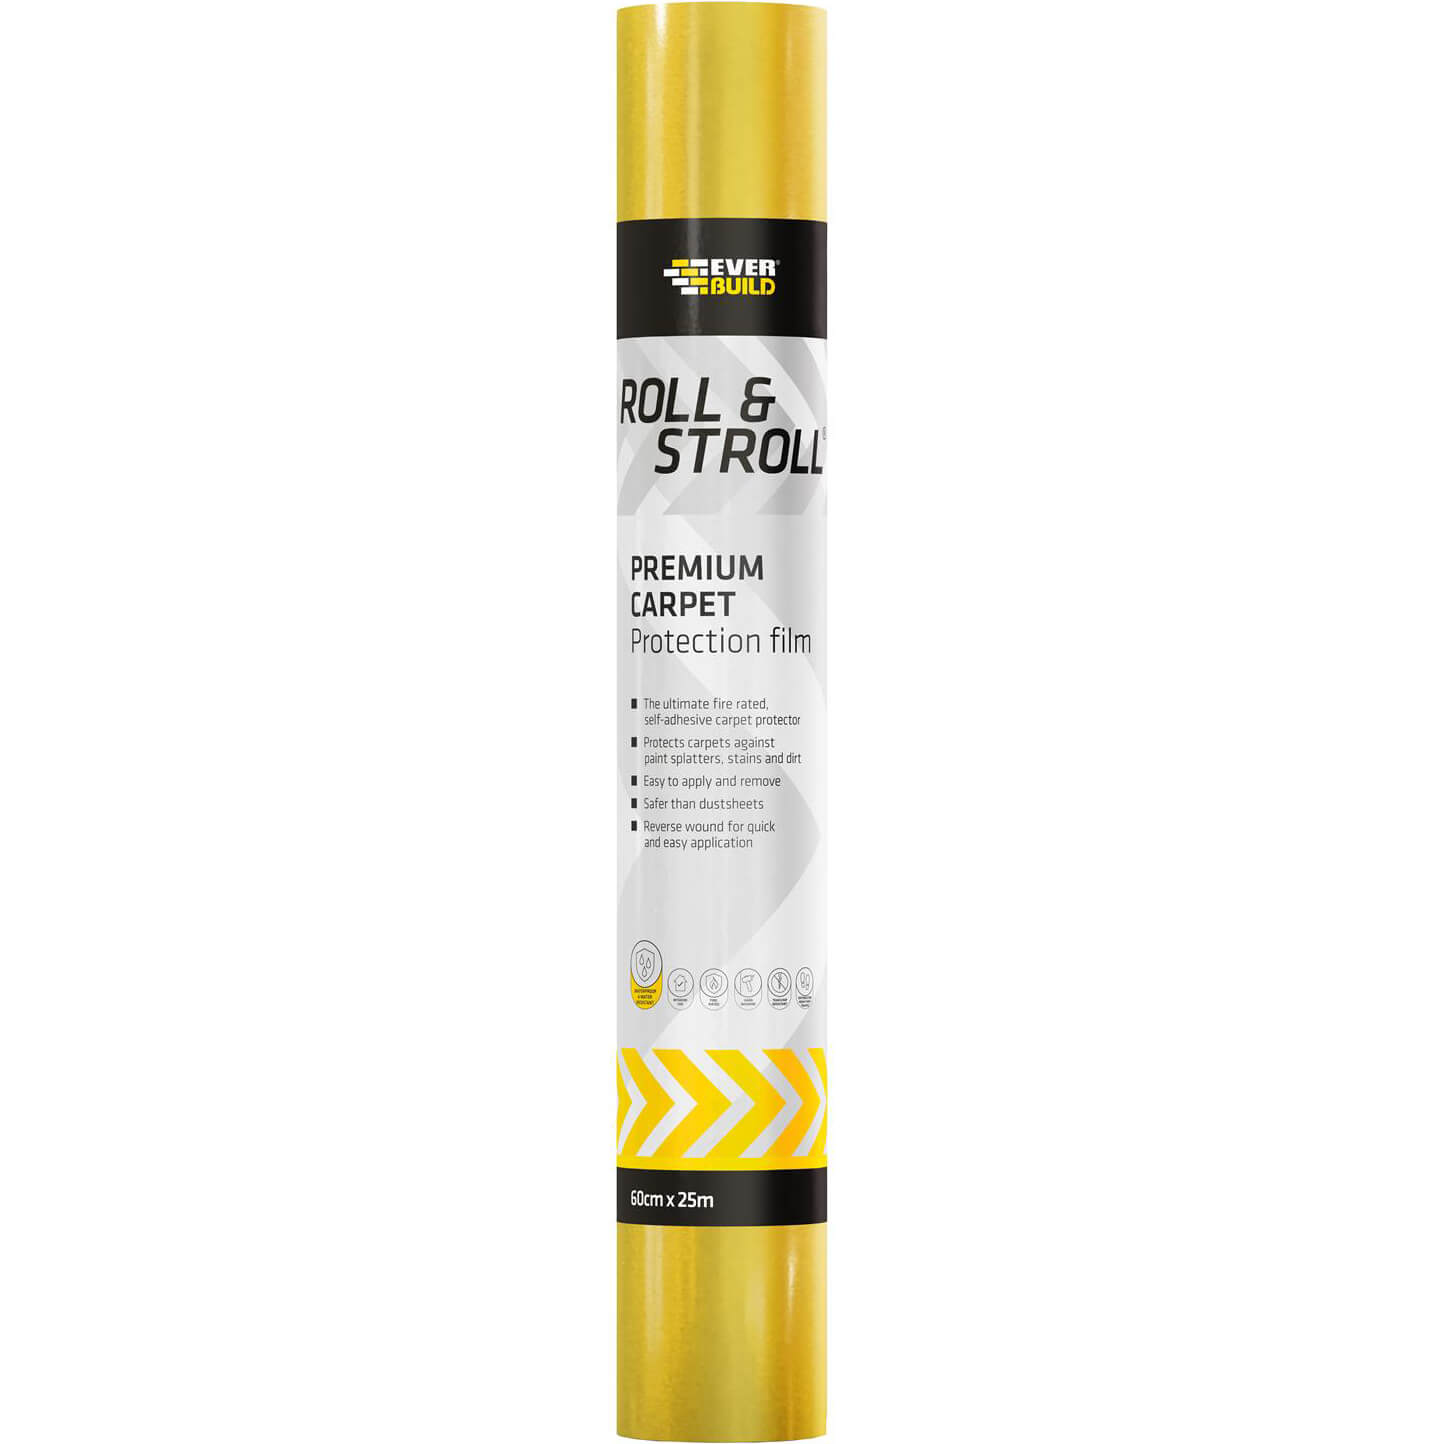 Image of Everbuild Roll and Stroll Premium Carpet Protector 600mm 20m